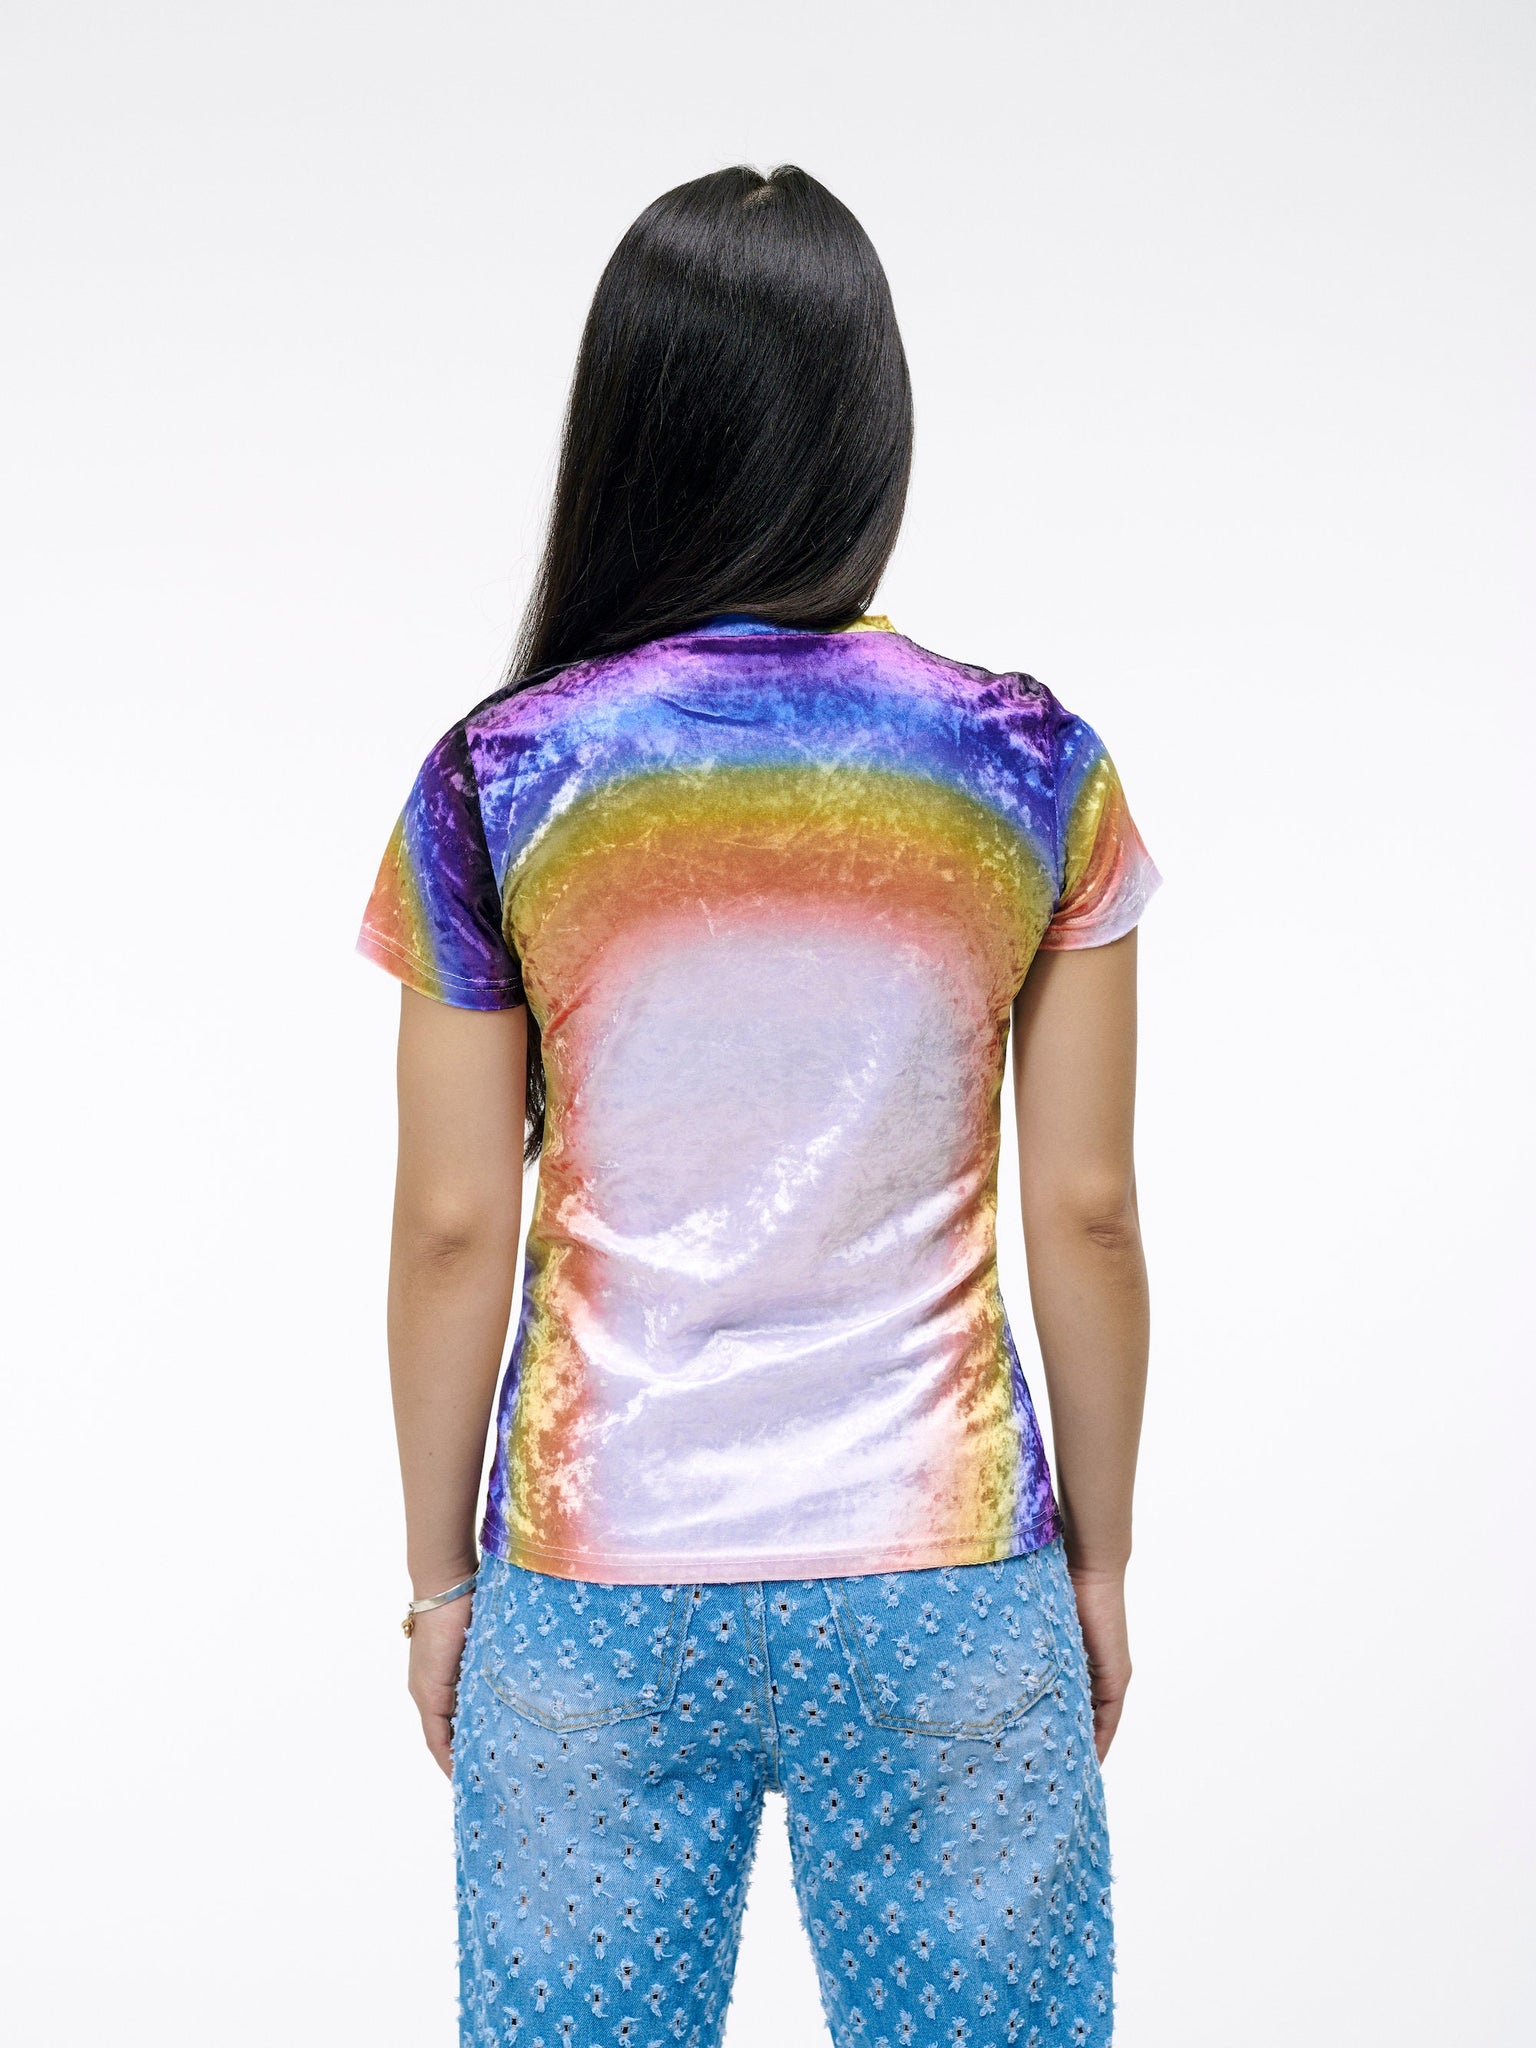 The Rainbow Gorgeous Velvet Top | The Tee for a More Colorful Tomorrow | Crushed Velvet Short Sleeve T-Shirt in Rainbow Print | Goose Taffy